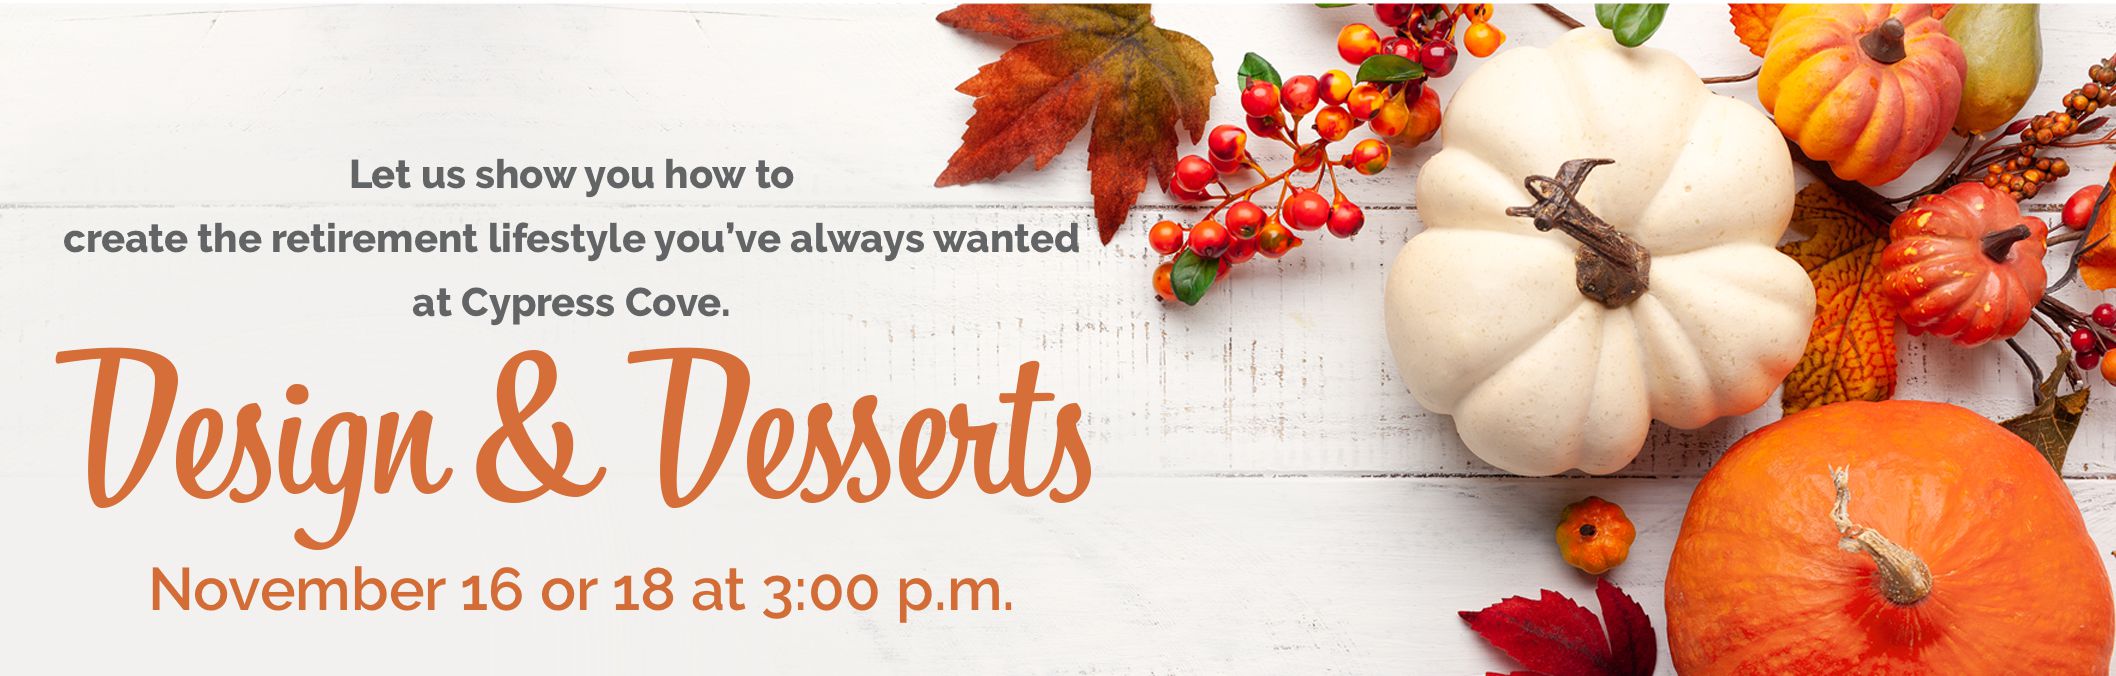 Let us show you how to create the retirement lifestyle you’ve always wanted at Cypress Cove. Design & Desserts